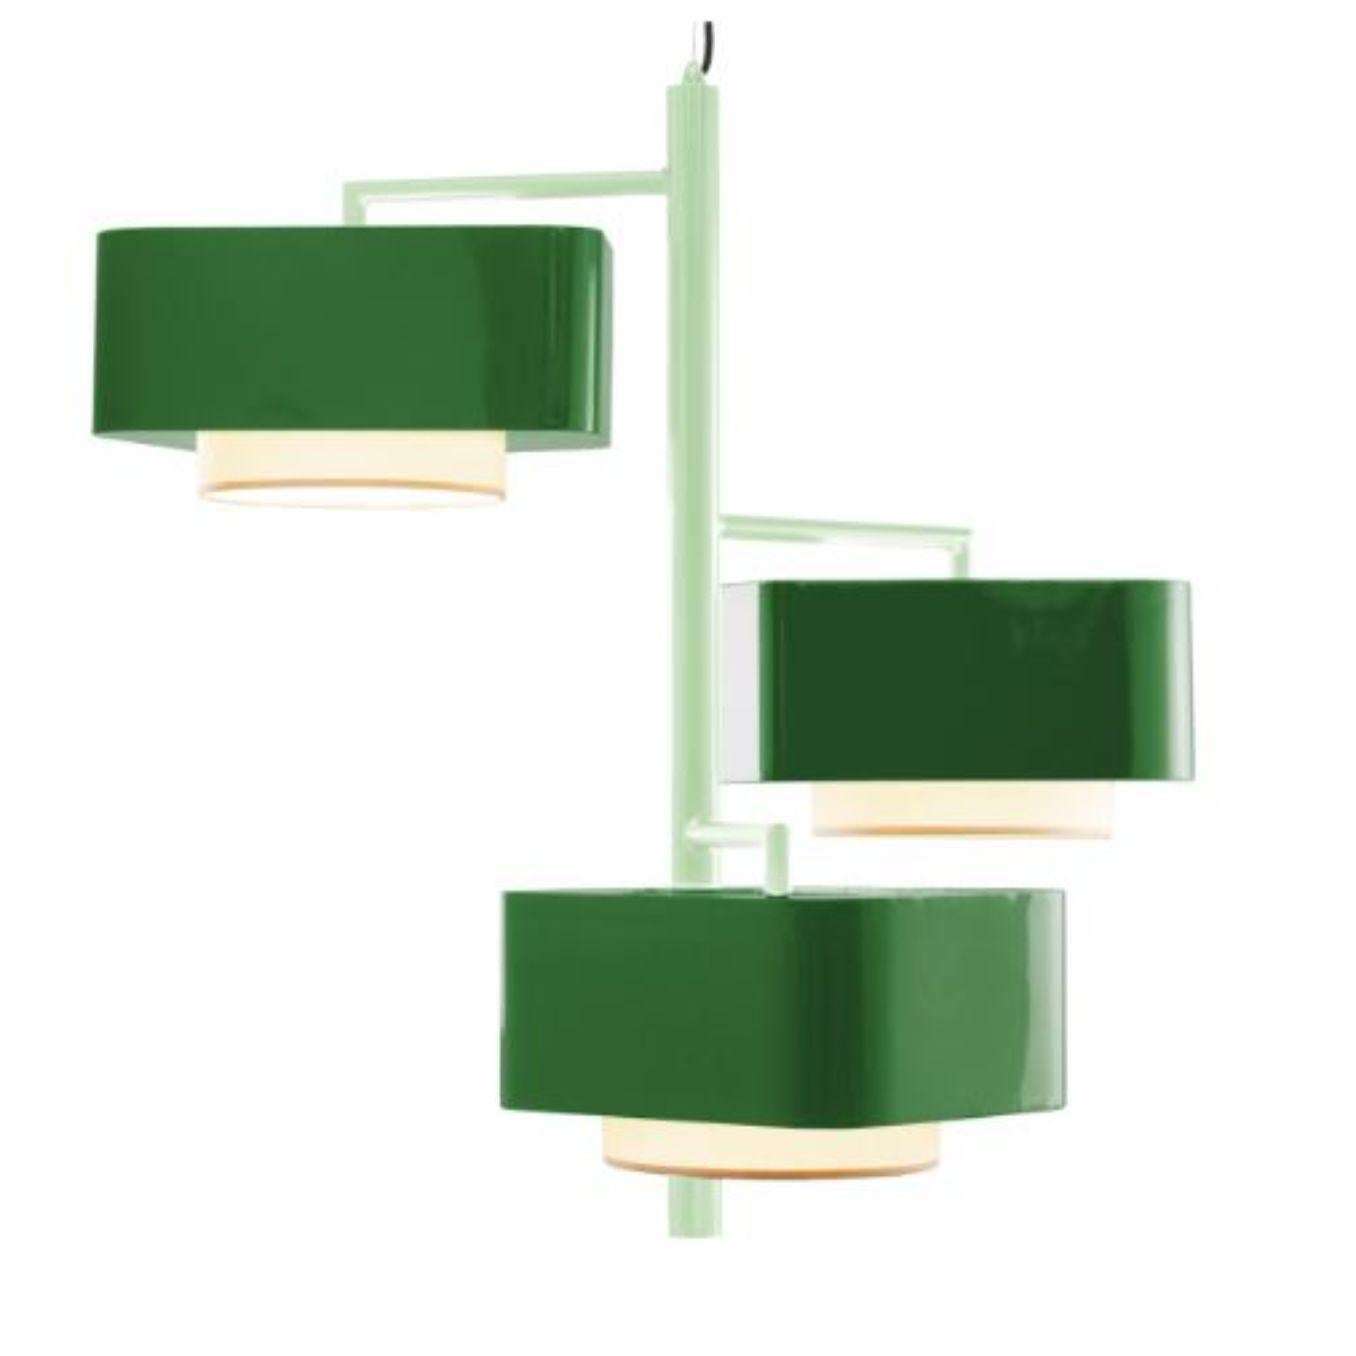 Emerald and dream Carousel I suspension lamp by Dooq
Dimensions: W 97 x D 97 x H 86 cm
Materials: lacquered metal.
abat-jour: cotton
Also available in different colors.

Information:
230V/50Hz
E27/3x20W LED
120V/60Hz
E26/3x15W LED
bulbs not